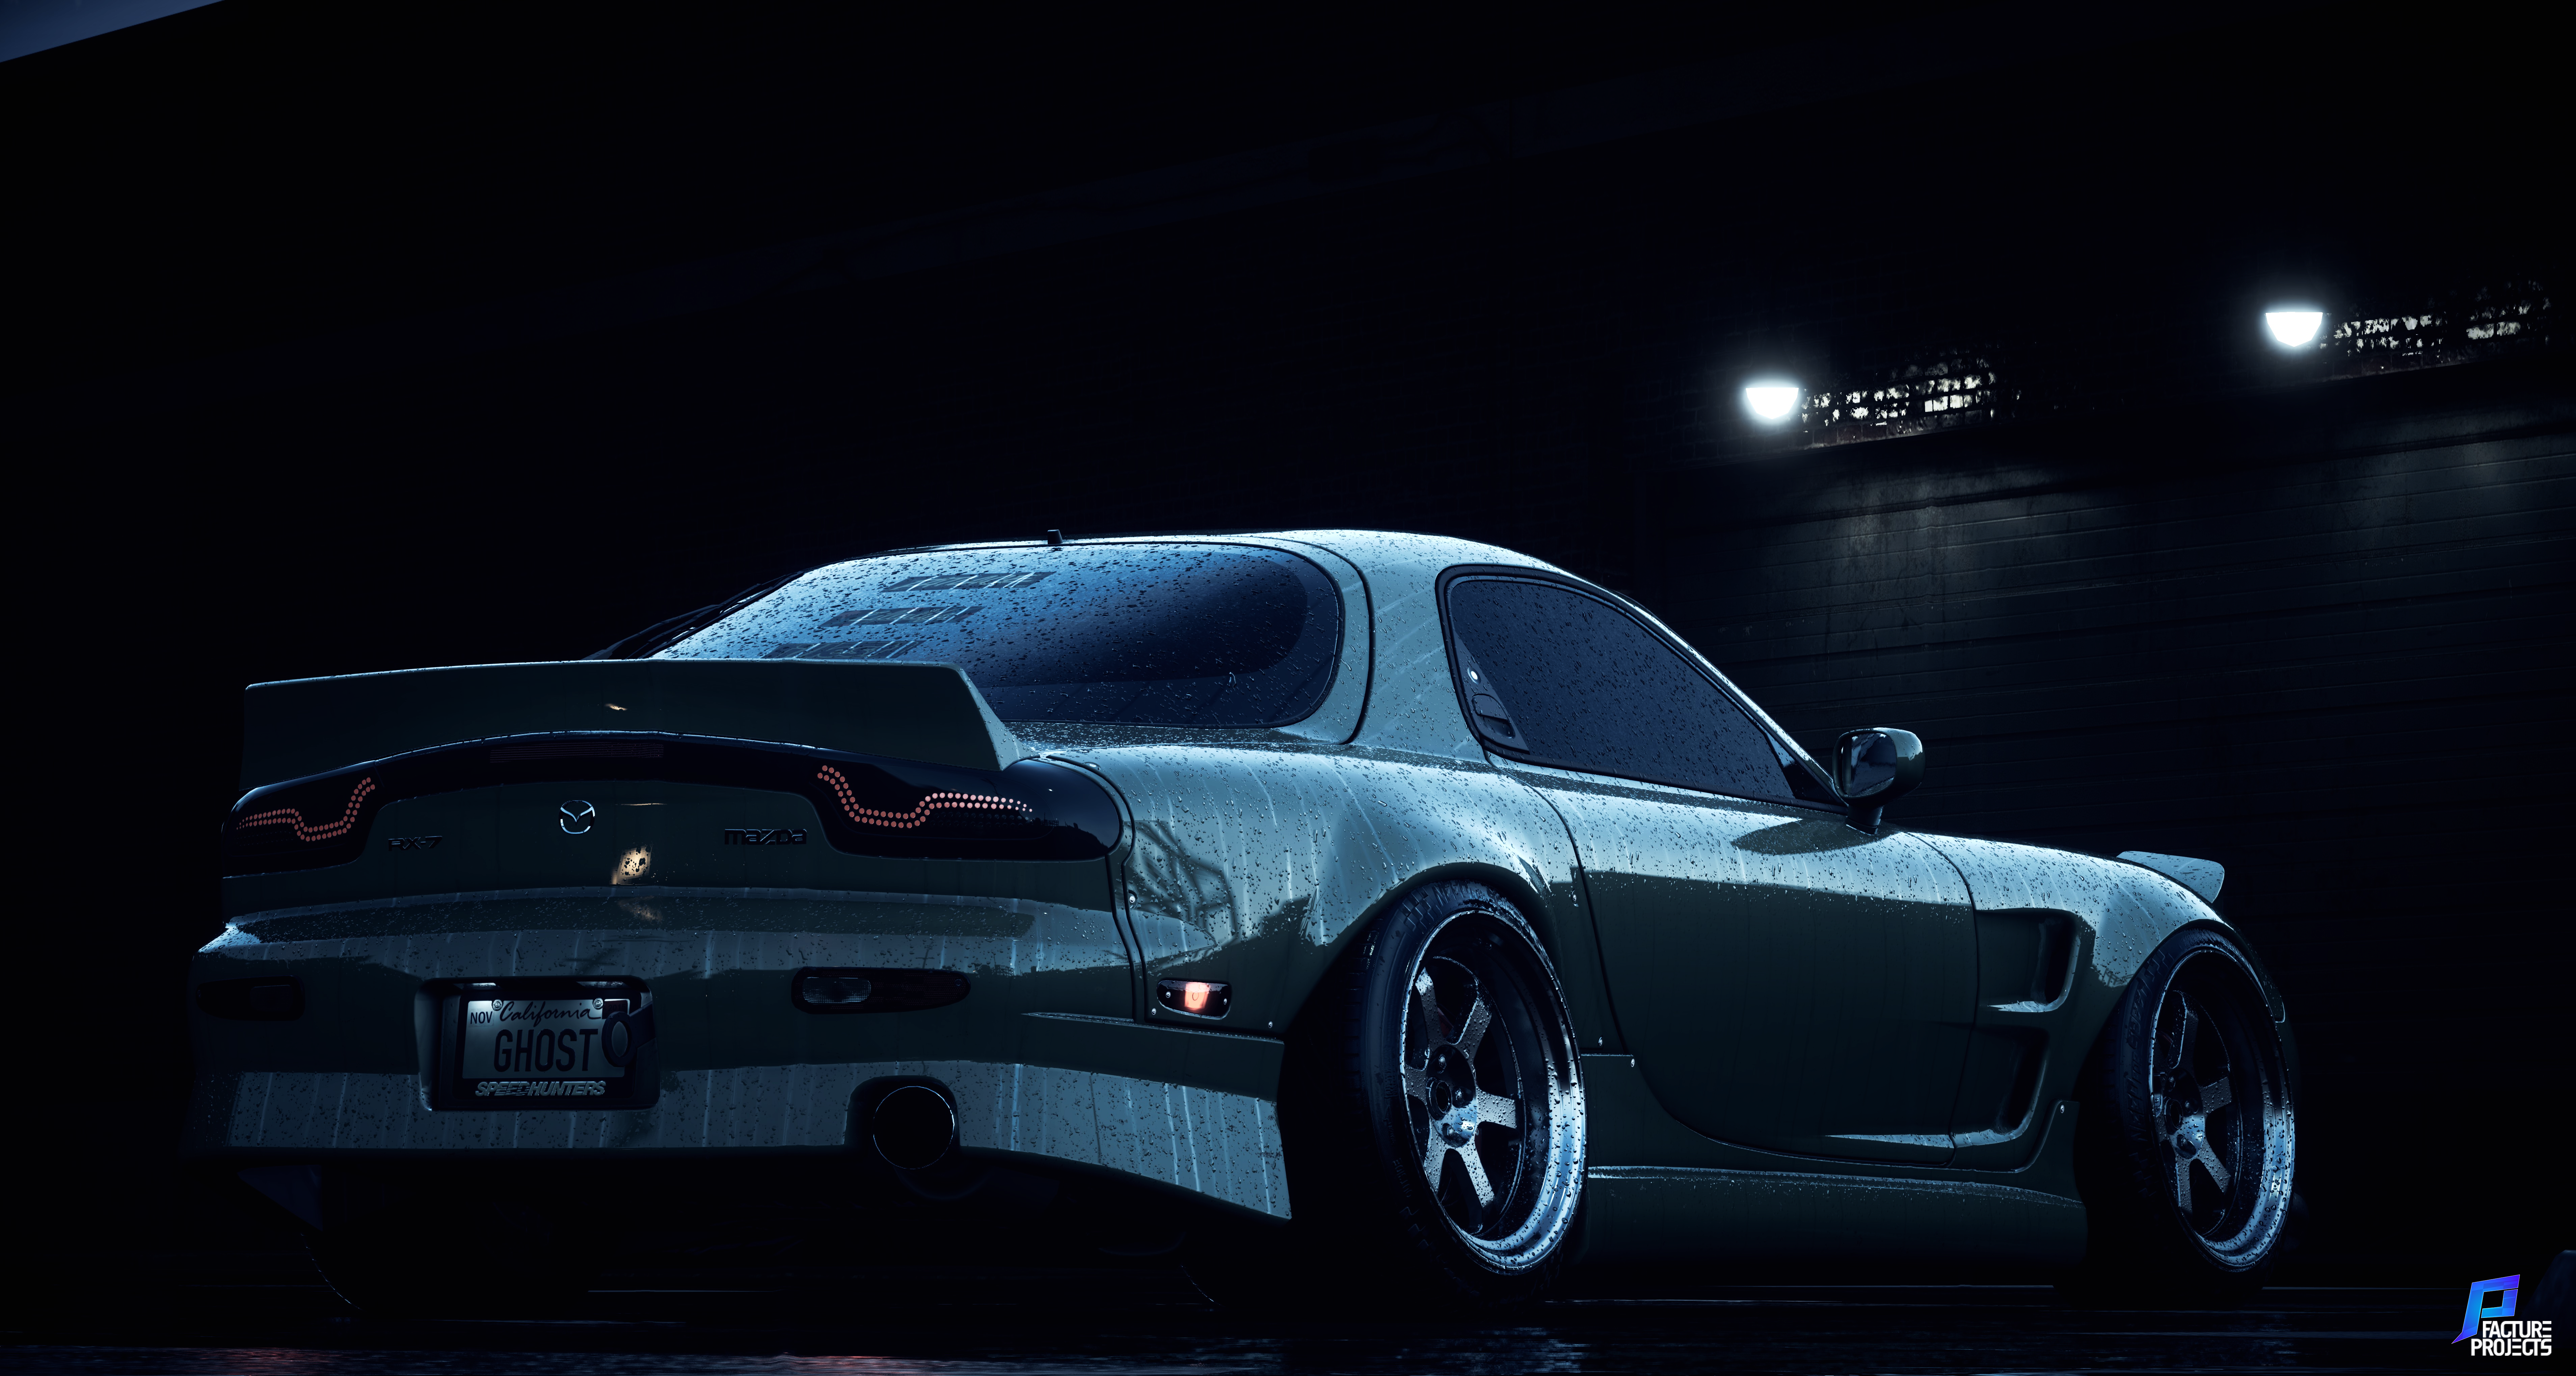 General 7632x4076 Mazda RX-7 Mazda Need for Speed Need for Speed 2015 modified car pop-up headlights